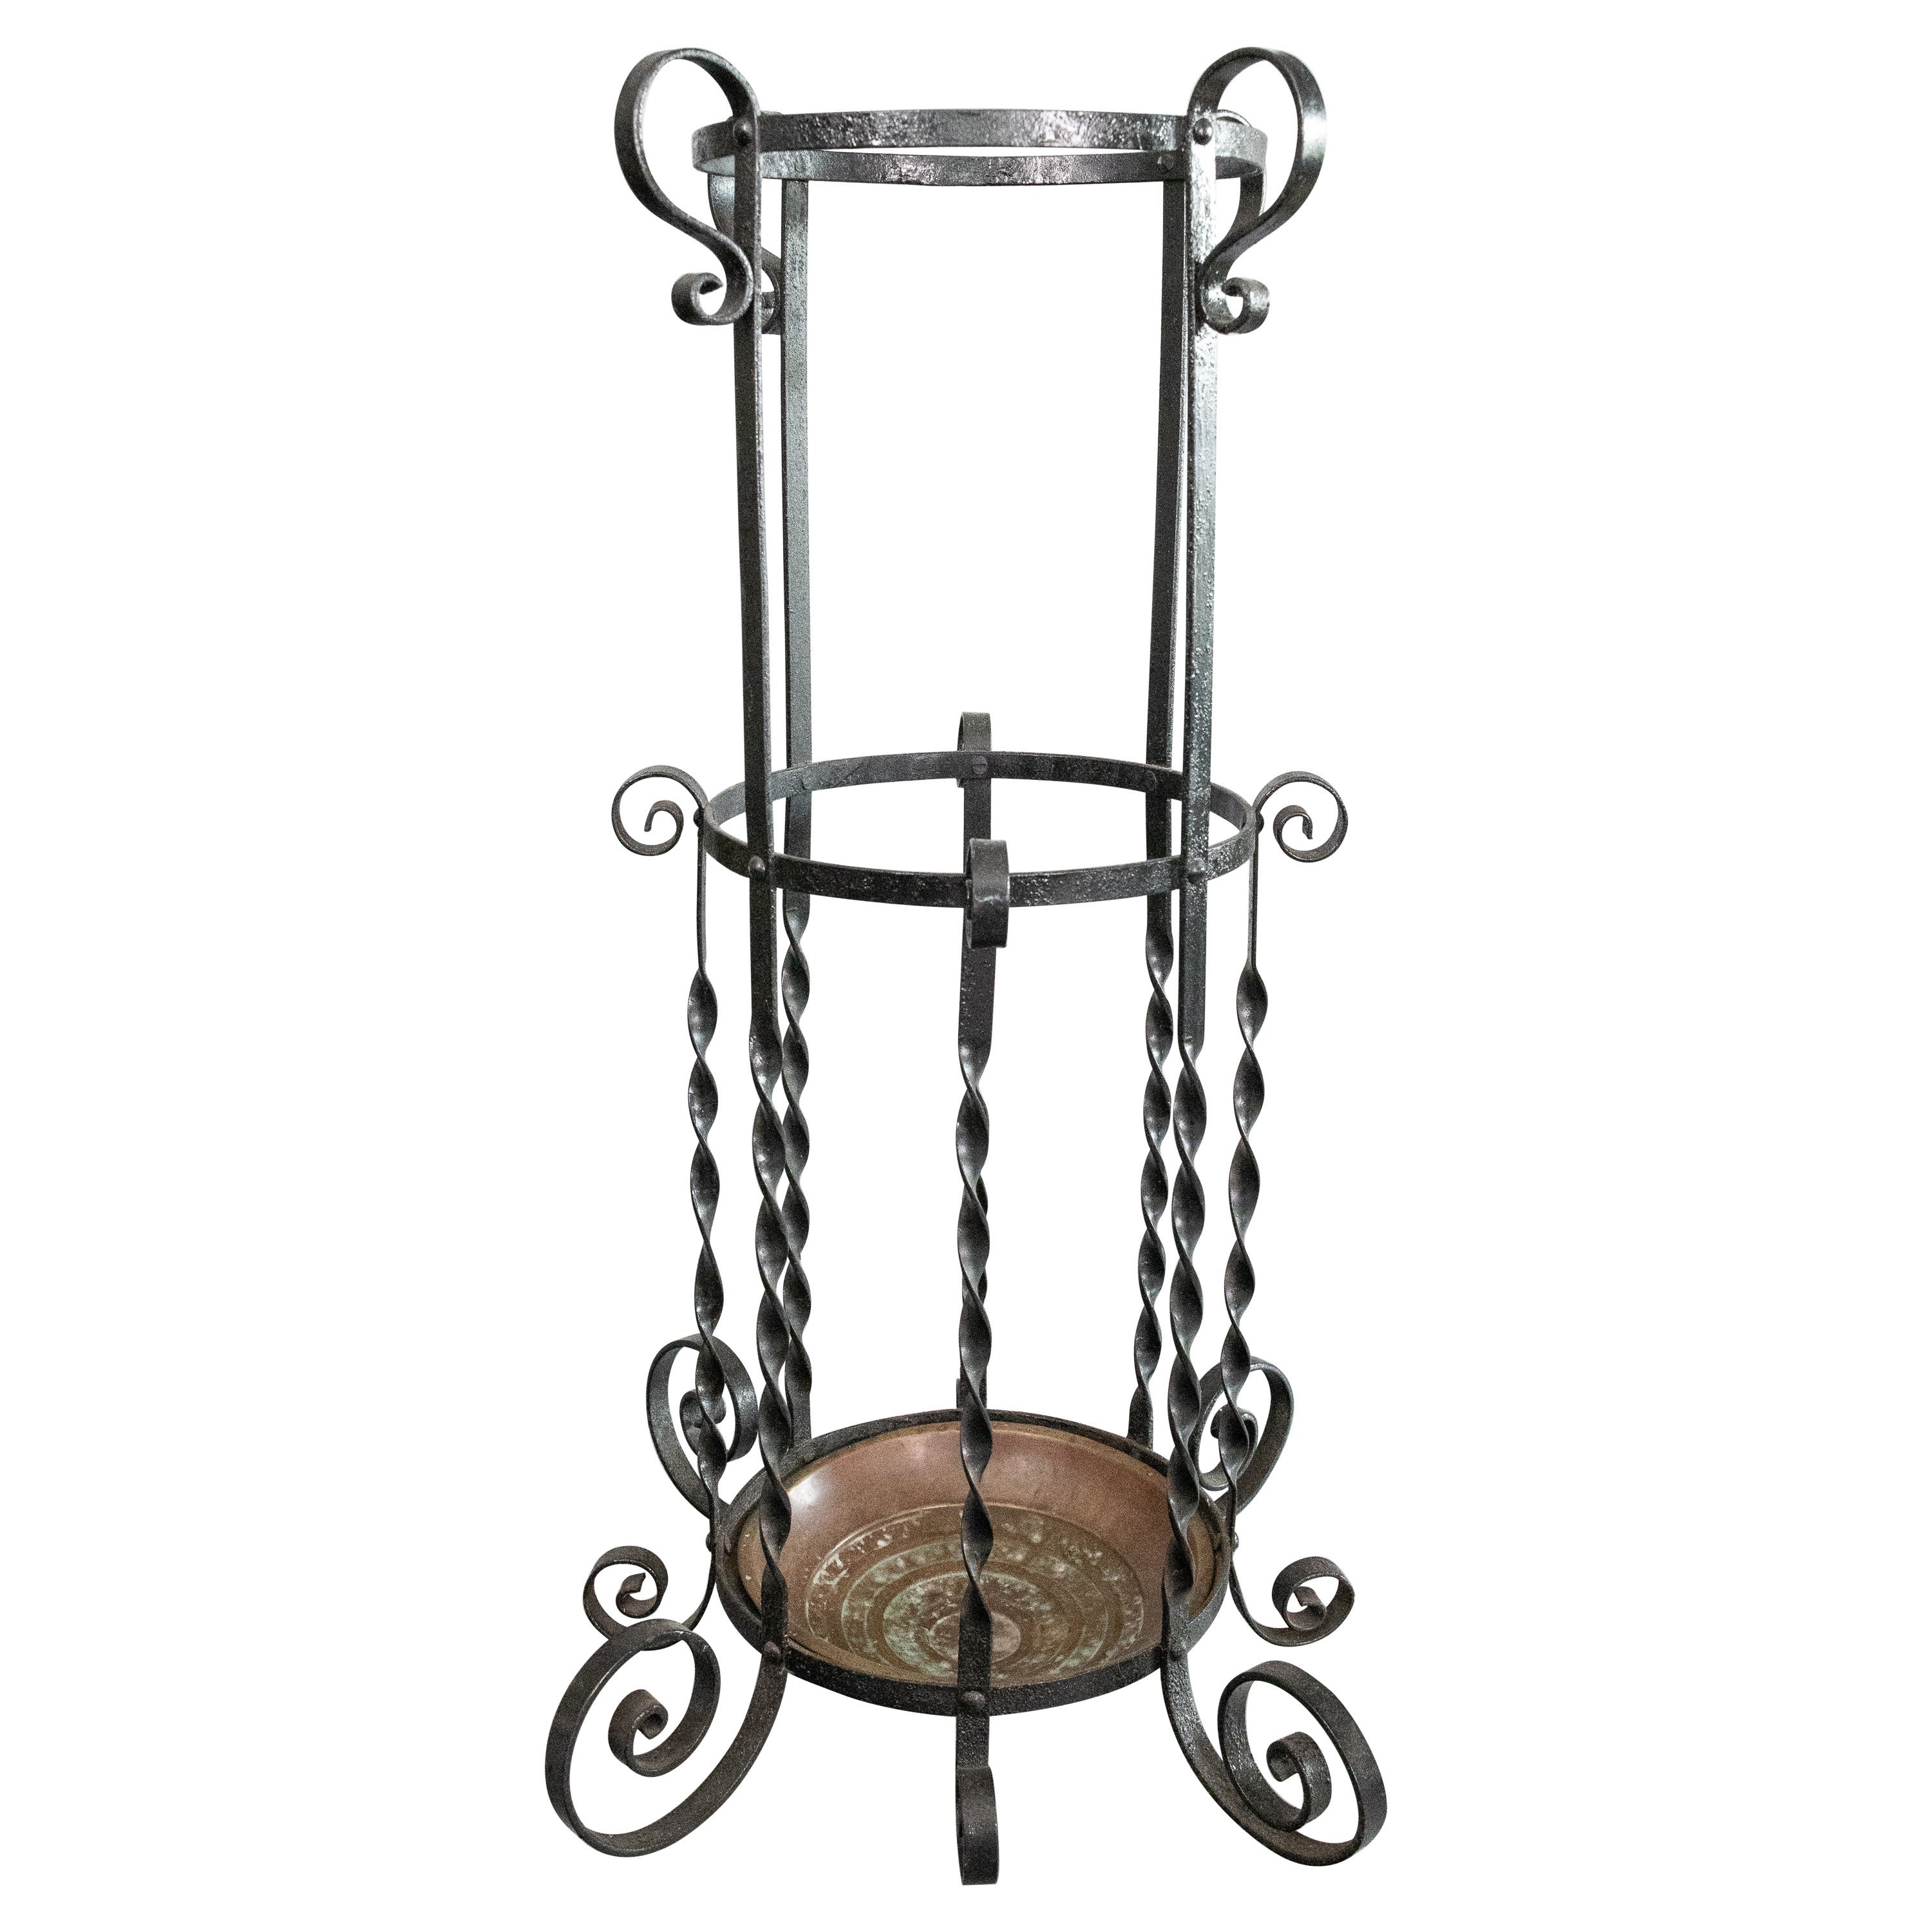 Antique French Wrought Iron Umbrella Stand